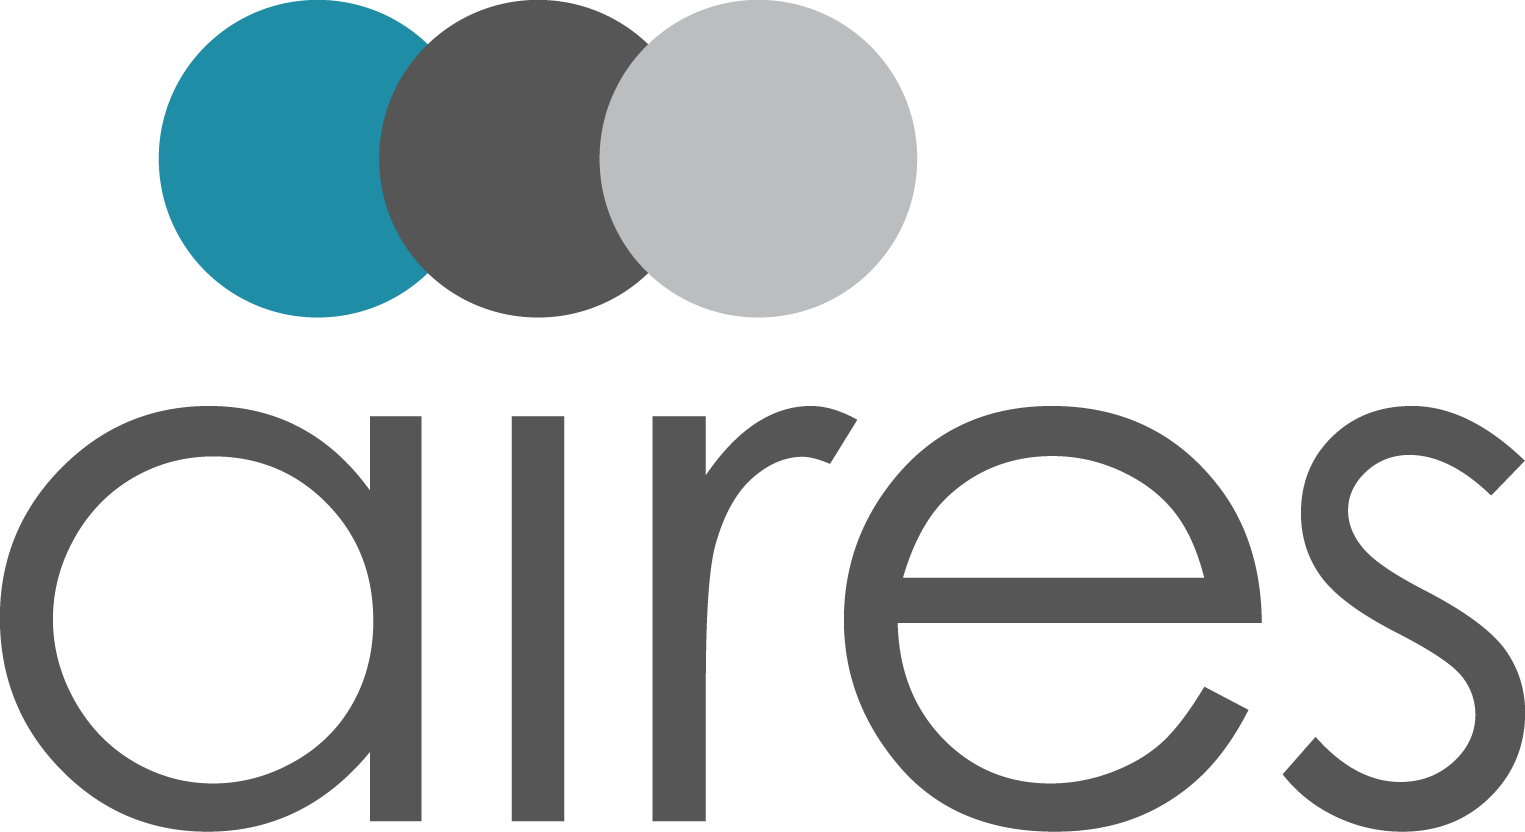 Aires logo